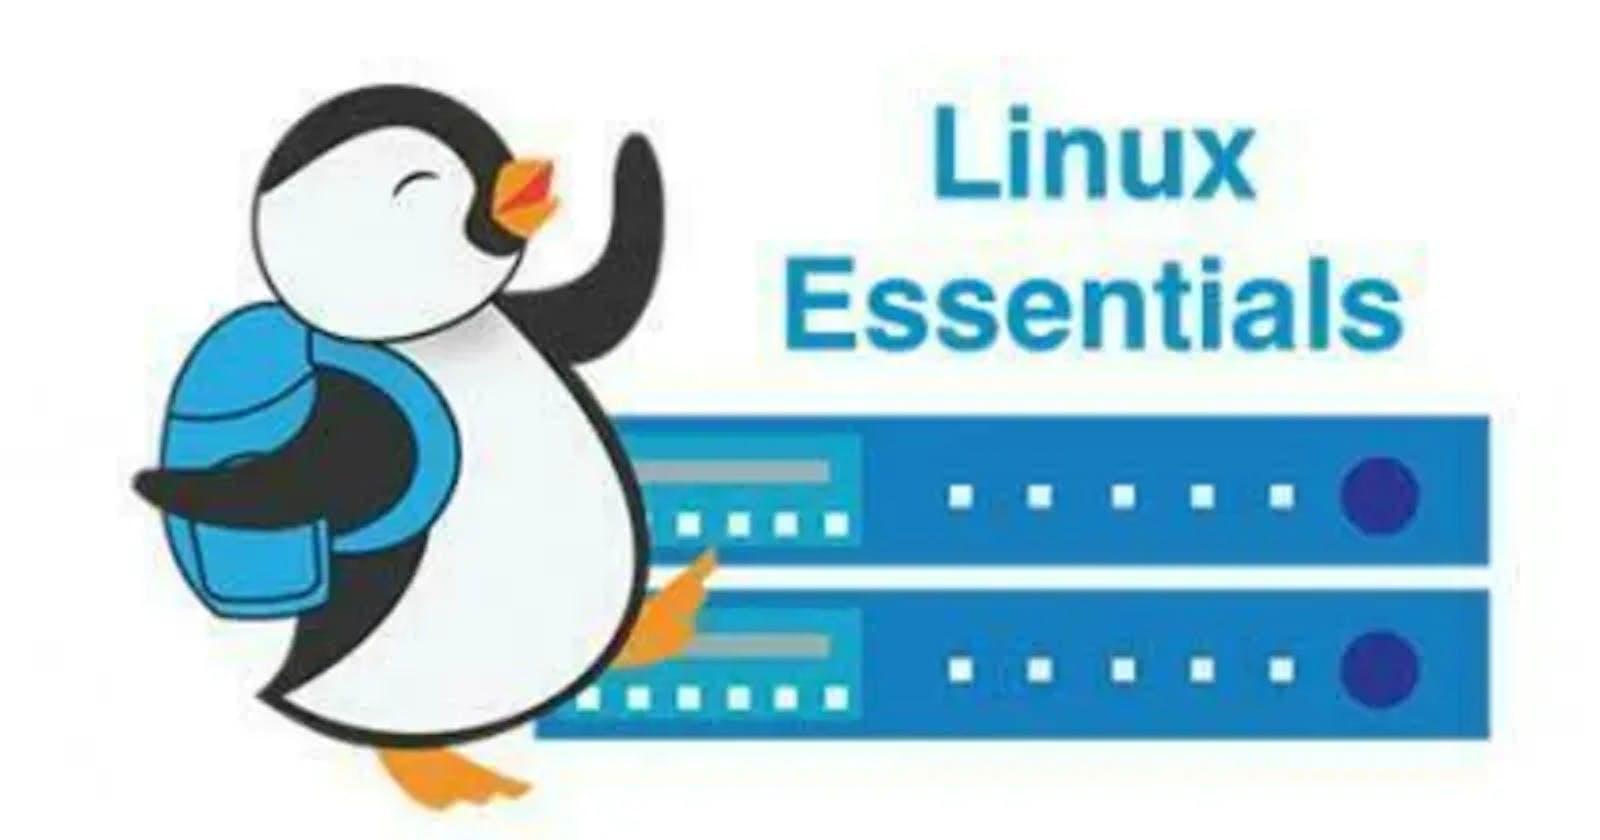 Linux: An Essential for DevOps, Especially for Beginners